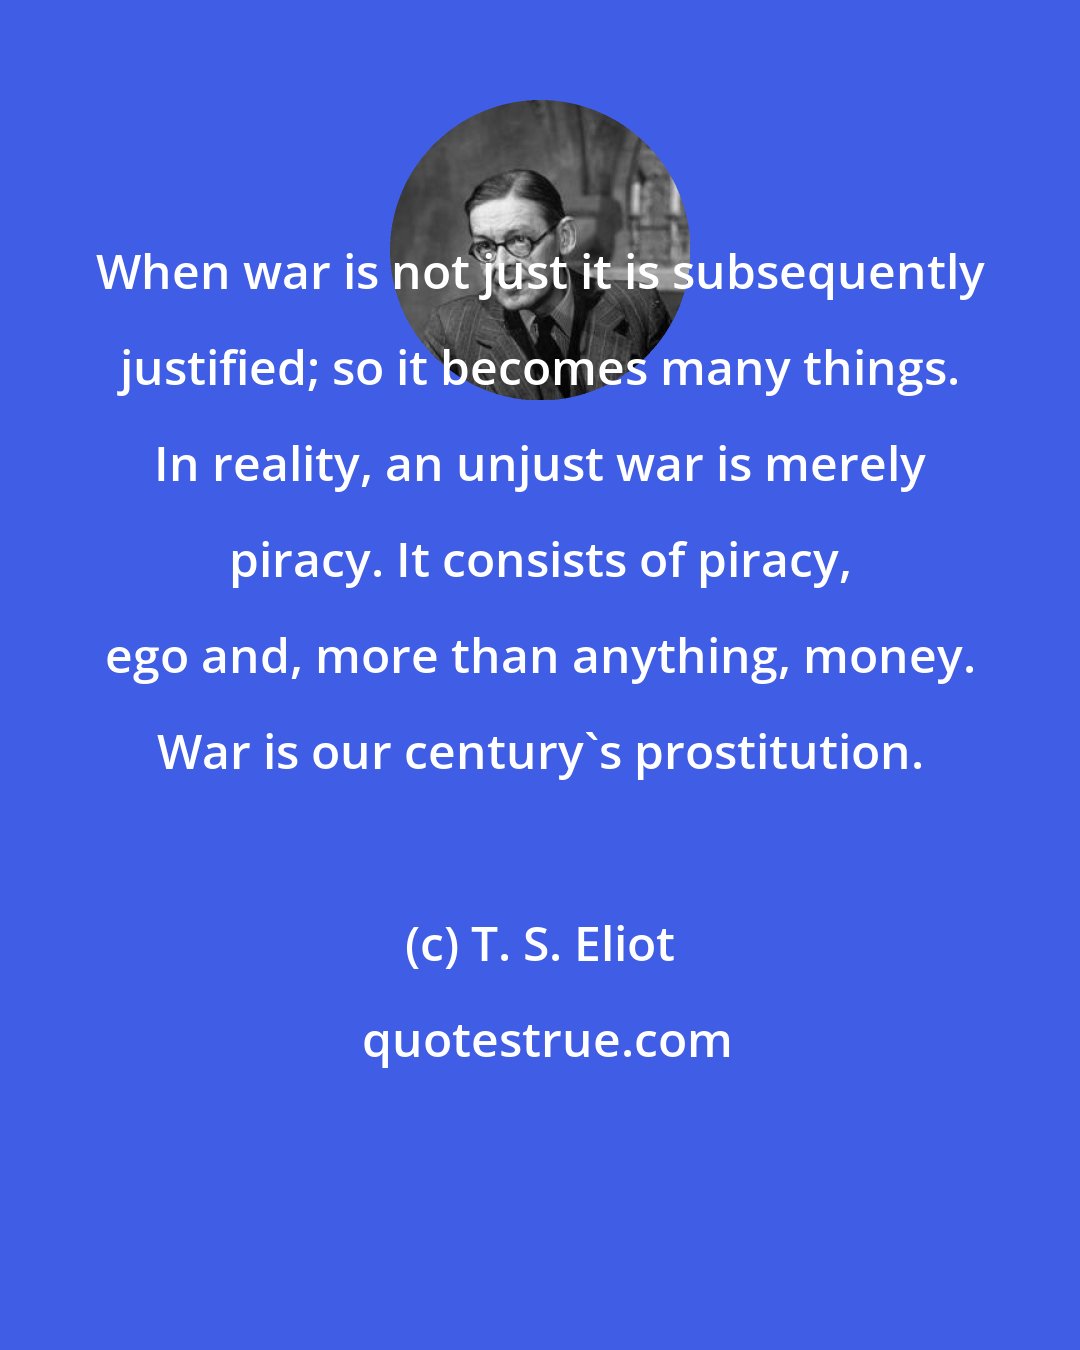 T. S. Eliot: When war is not just it is subsequently justified; so it becomes many things. In reality, an unjust war is merely piracy. It consists of piracy, ego and, more than anything, money. War is our century's prostitution.